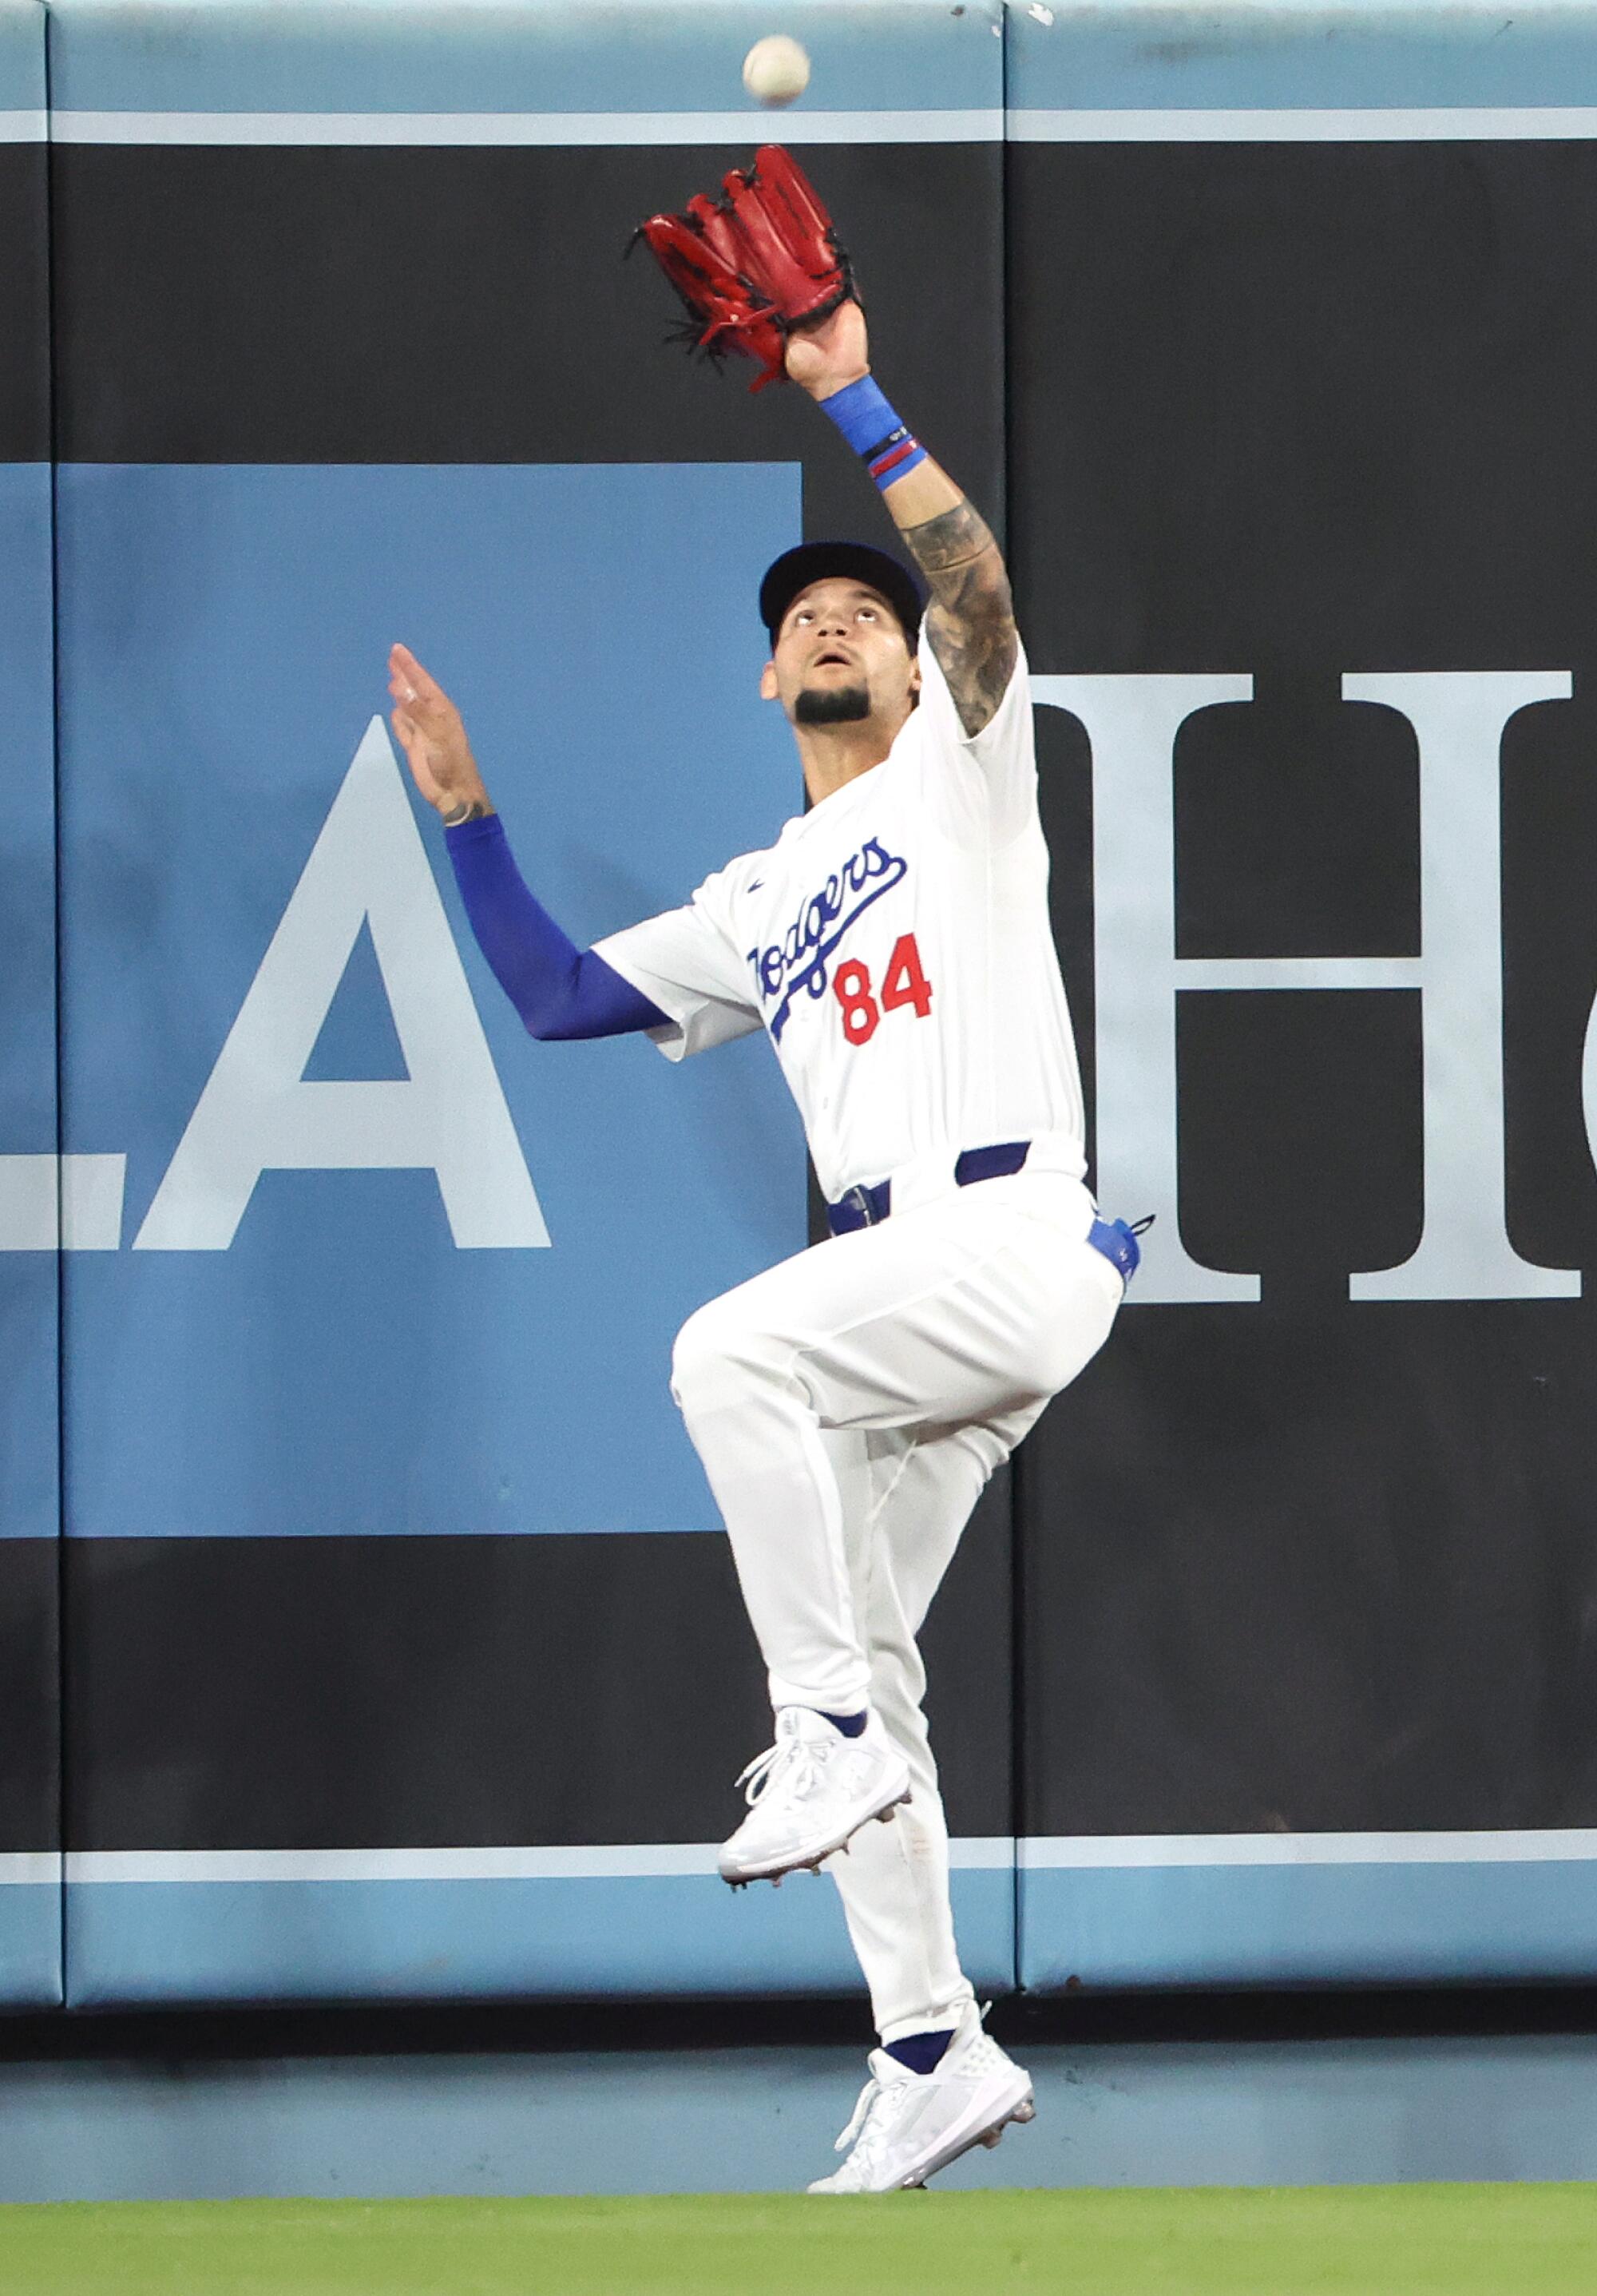 Dodgers center fielder Andy Pages makes a catch at the wall during a game against the Nationals.